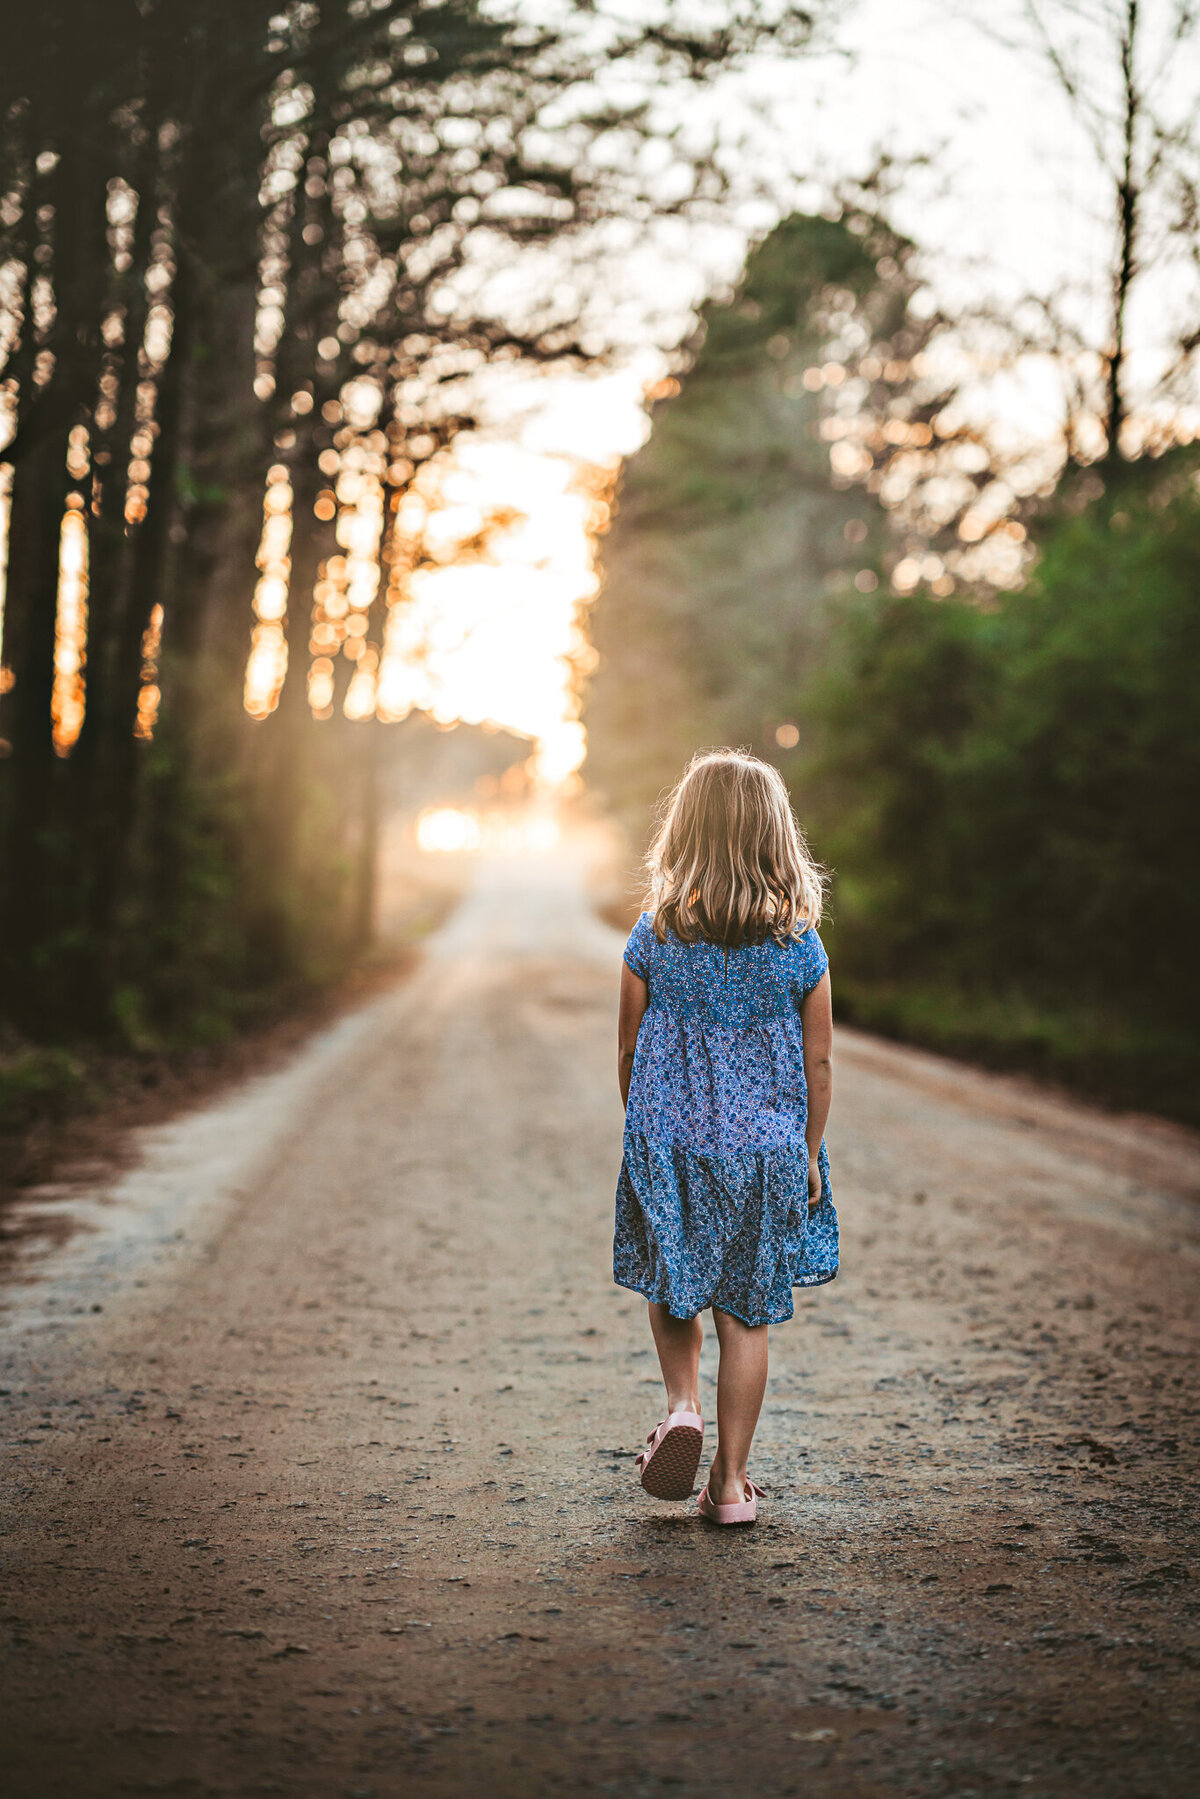 A young girl in a blue dress is walking down a dirt road at sunset.